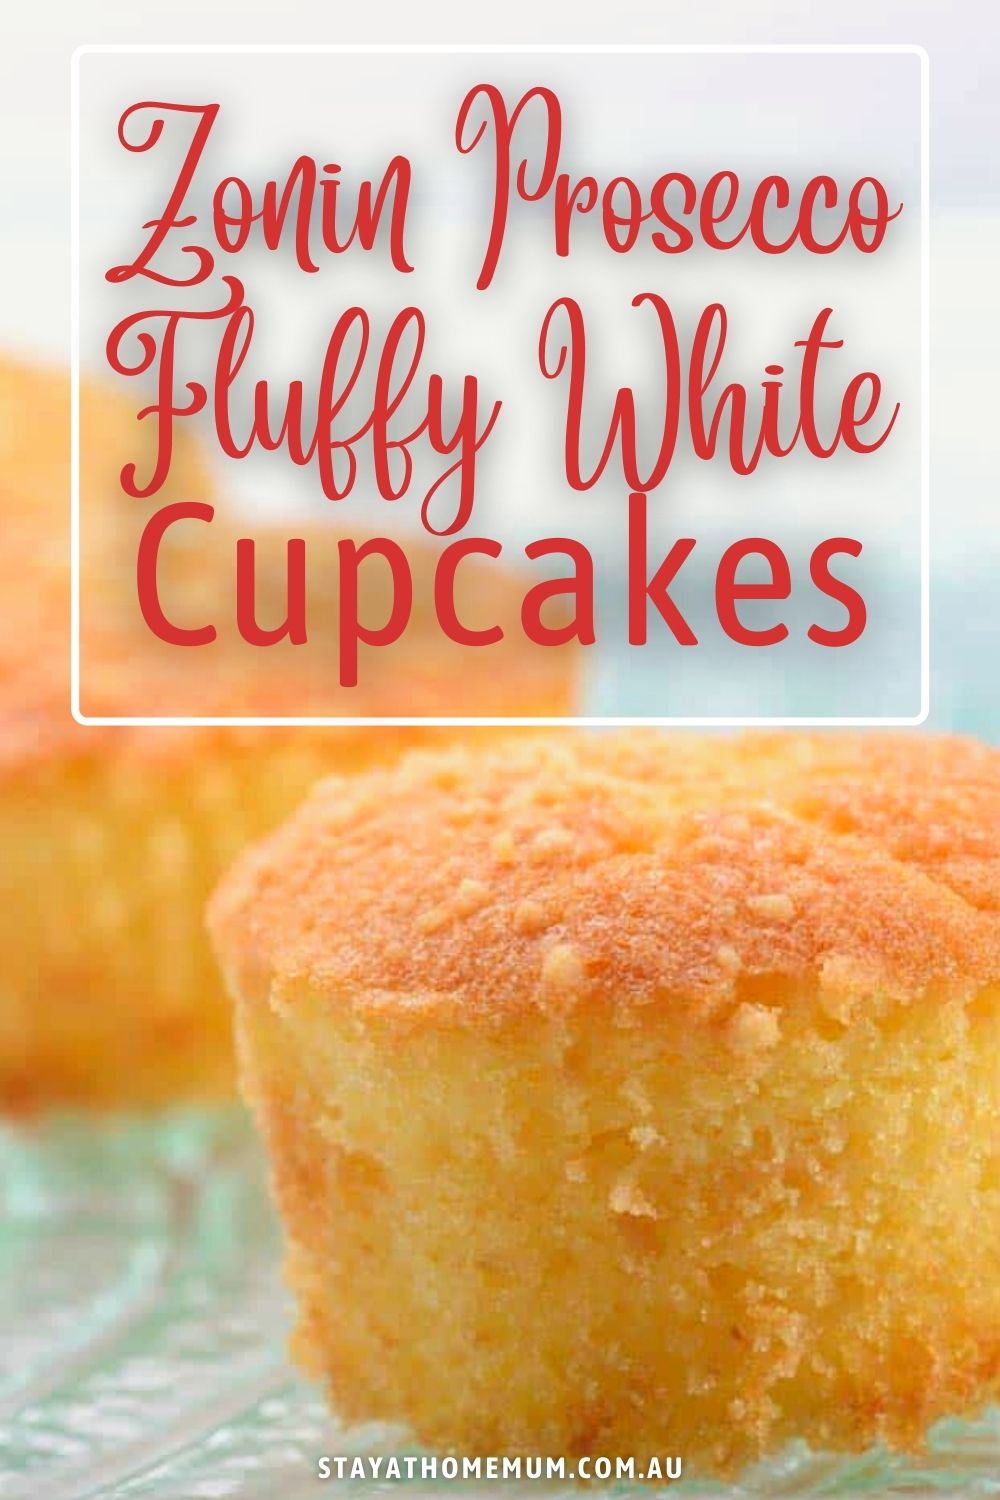 Zonin Prosecco Fluffy White Cupcakes Pinnable